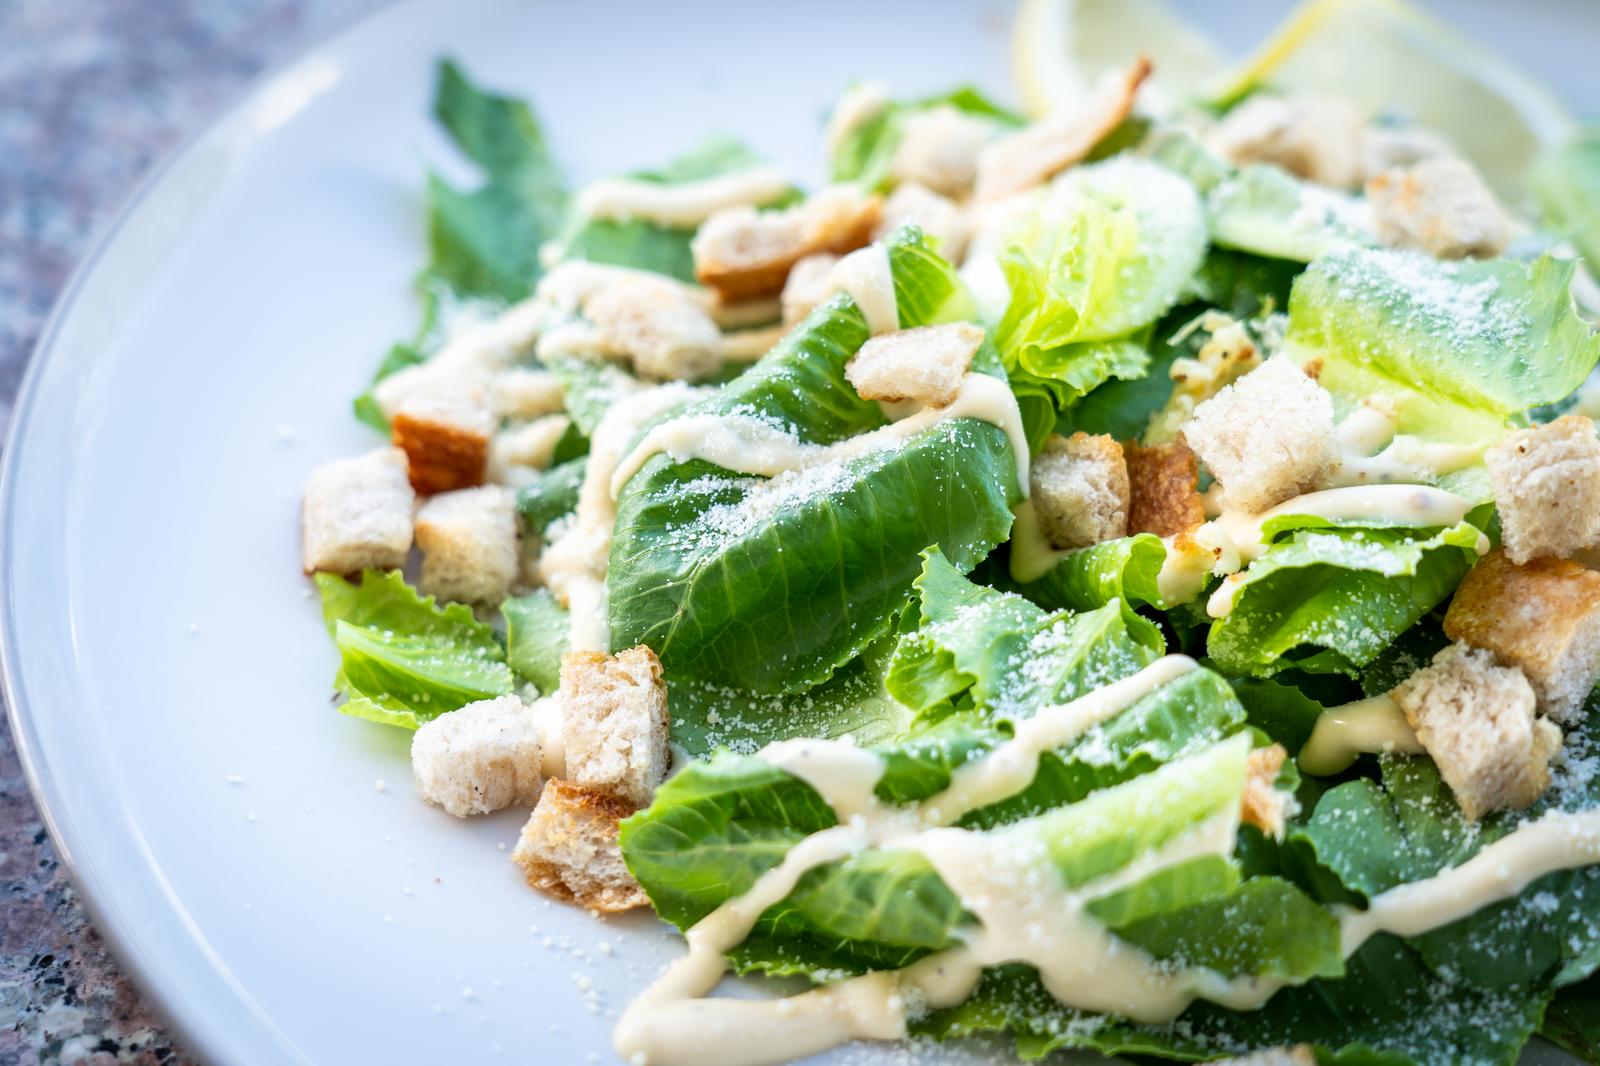 This 25-Question Mixed Trivia Quiz Was Made to Prevent You from Passing. Can You Beat the Odds? Caesar salad